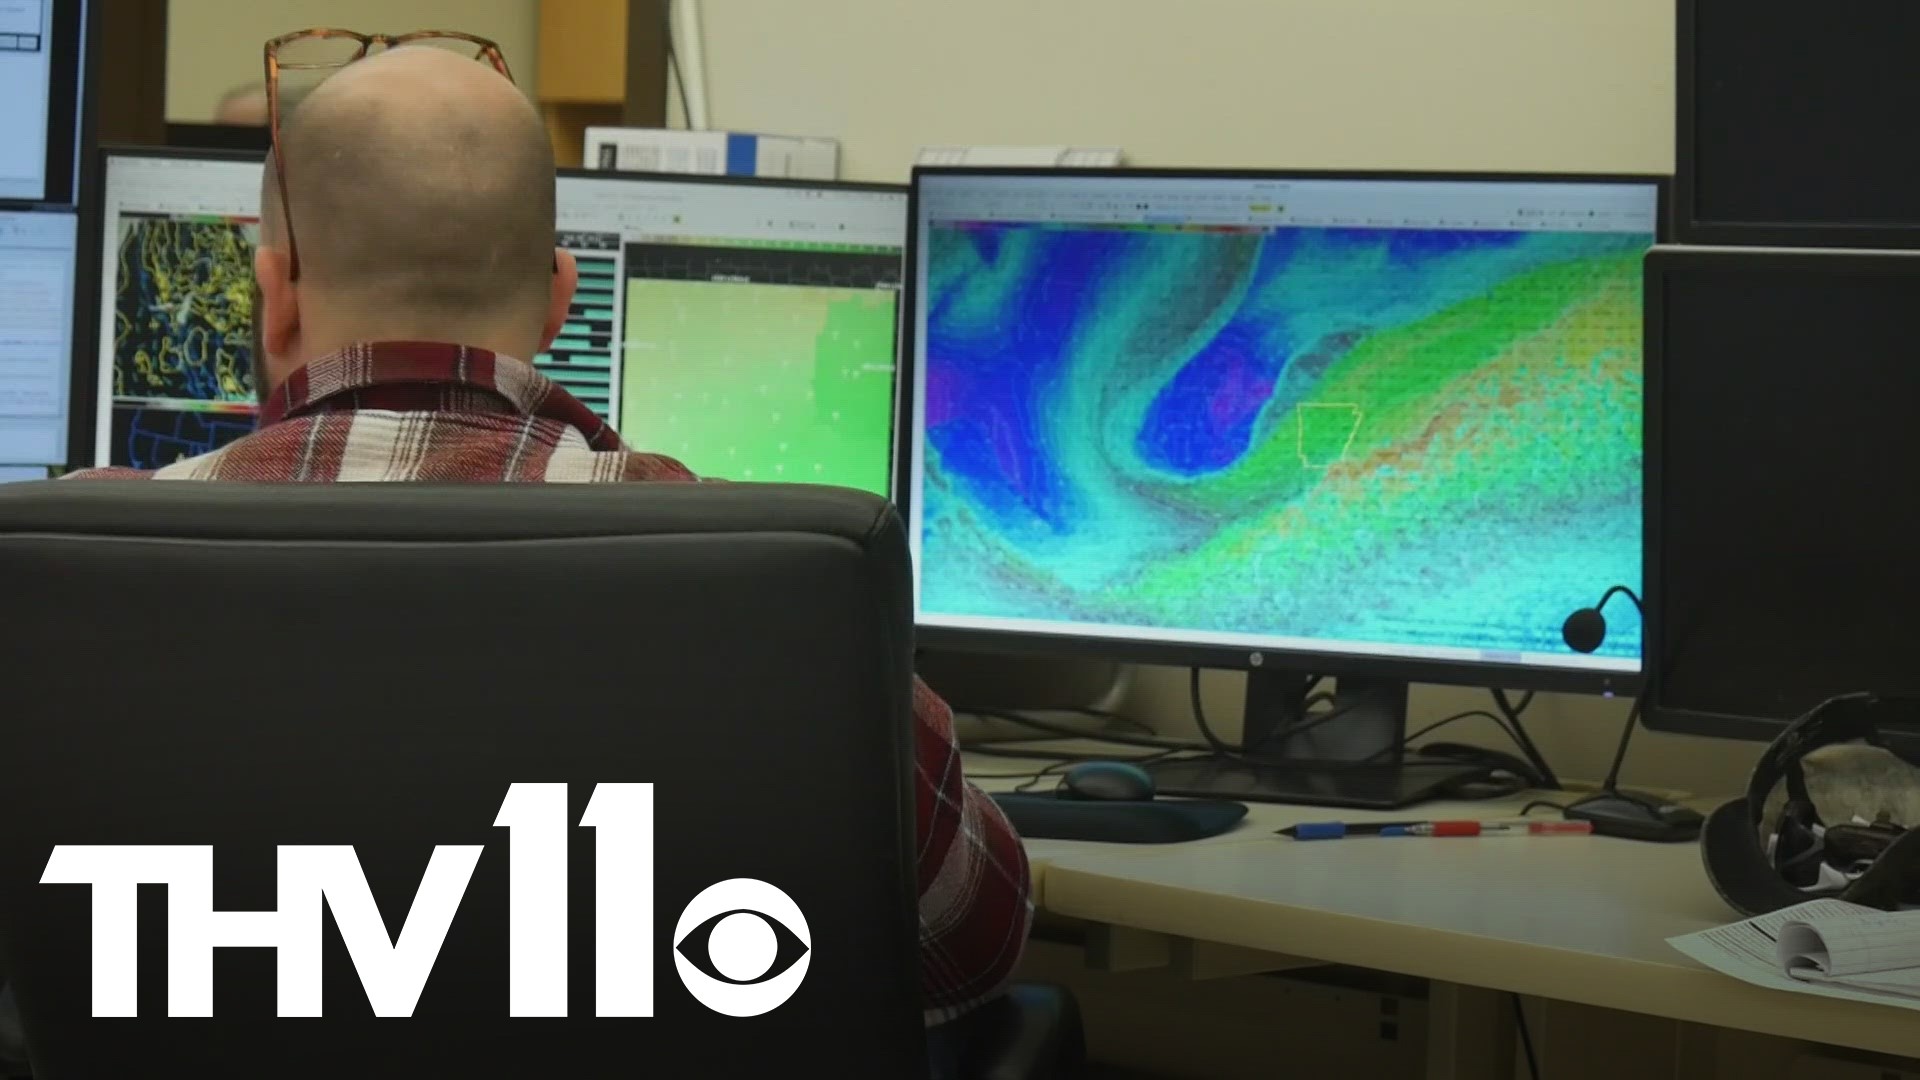 Arkansas's severe weather season is approaching, and experts are sharing how their ability to detect tornadoes and storm rotation has improved drastically.